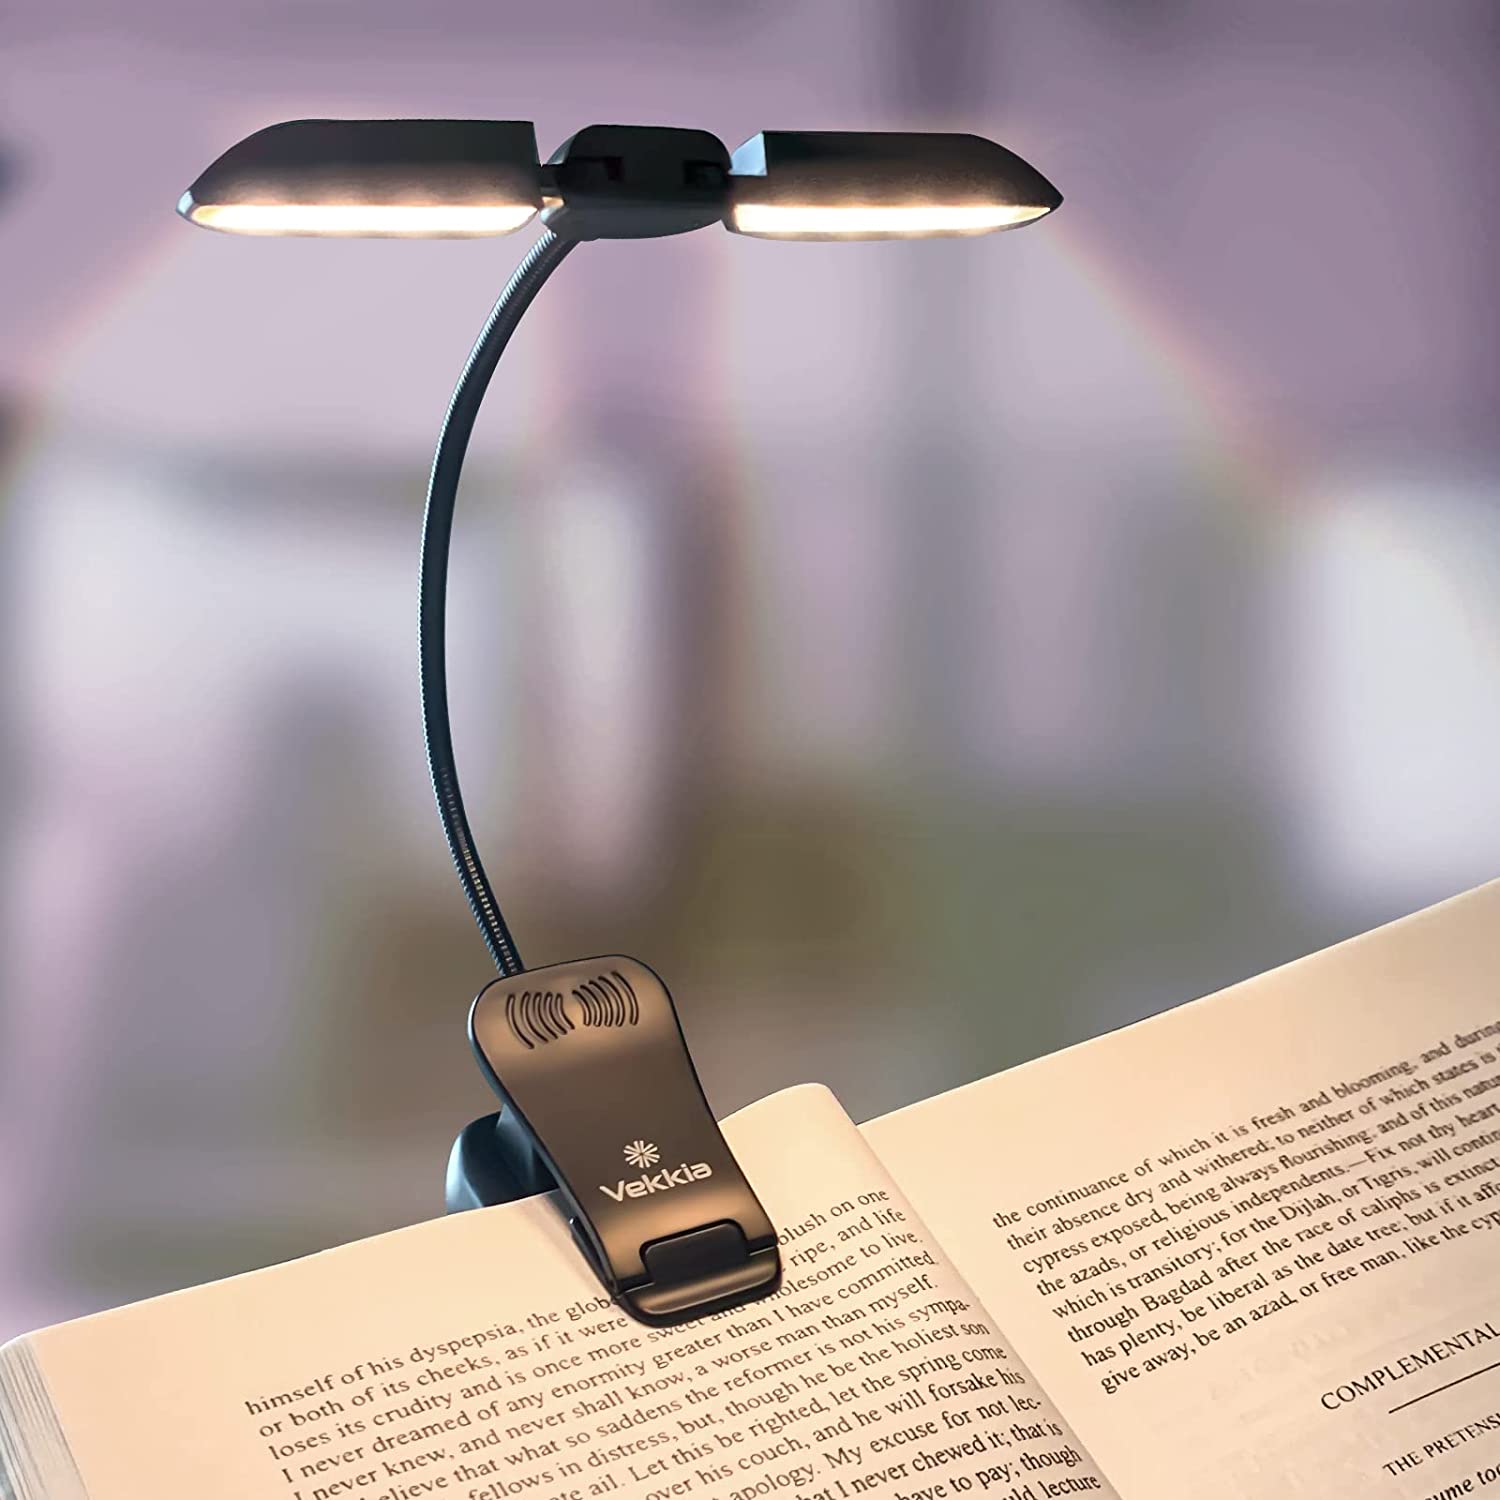 2-Arms 6-Led Flexibility Book Lamp Rechargeable Light, Ideal For Book Reading, Music Stand, Pianos, Laptop. In Pakistan